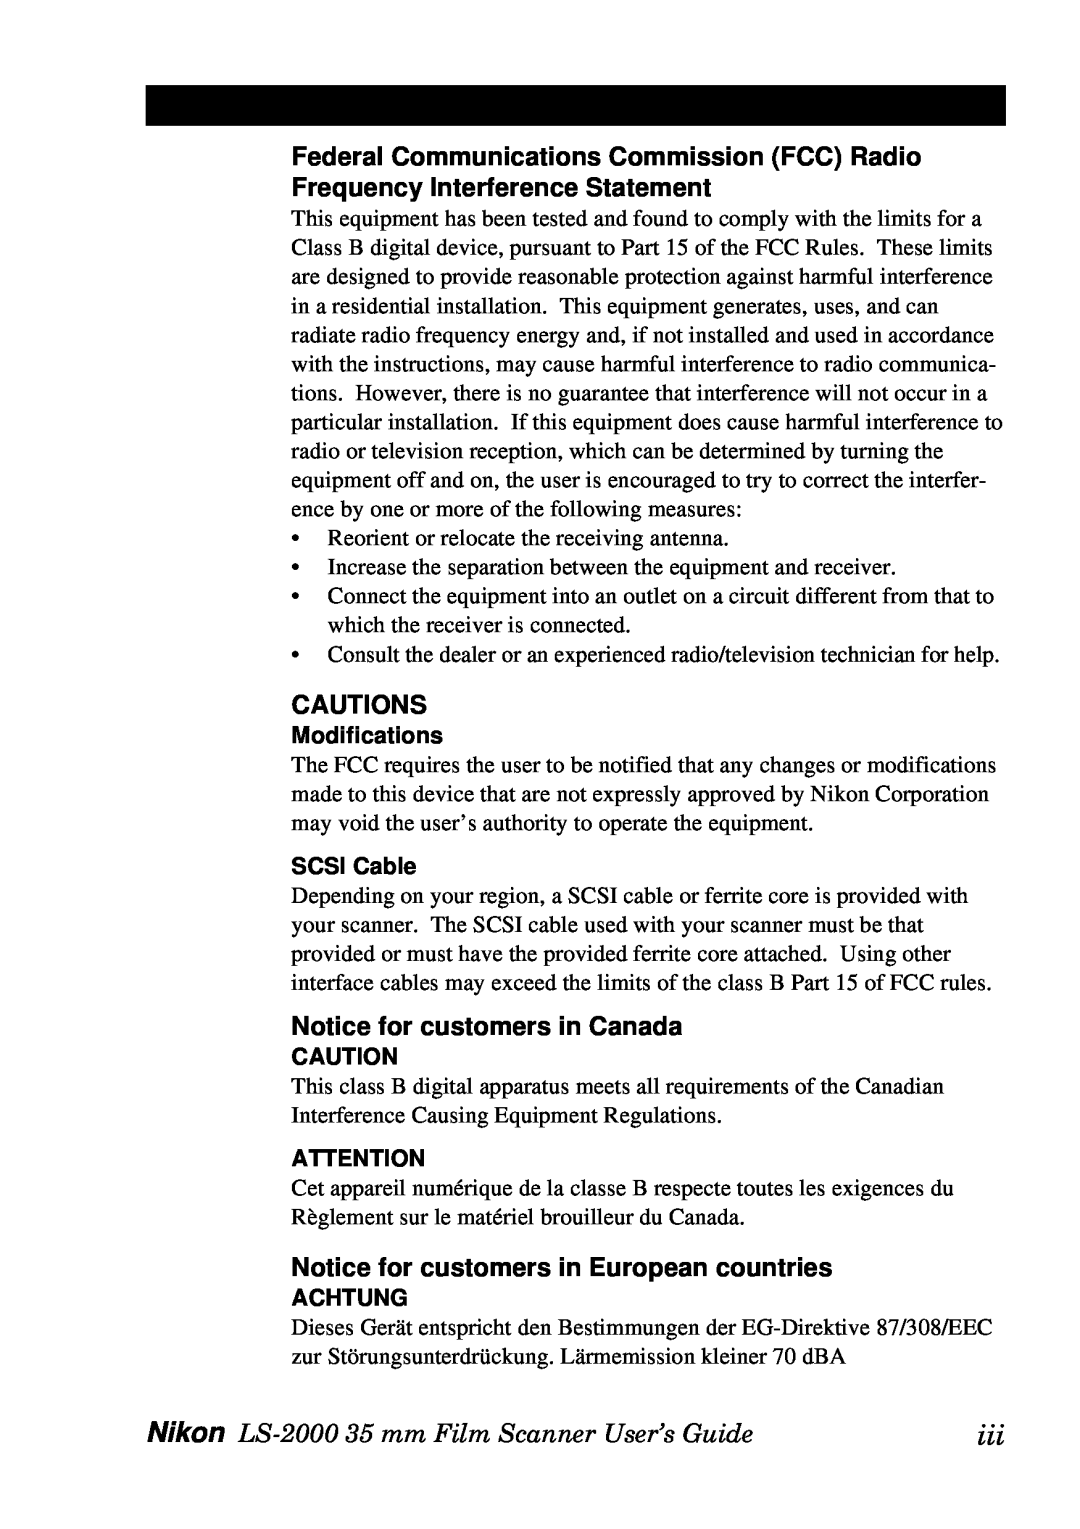 Nikon LS-2000 Cautions, Notice for customers in Canada, Notice for customers in European countries, Modifications, Achtung 